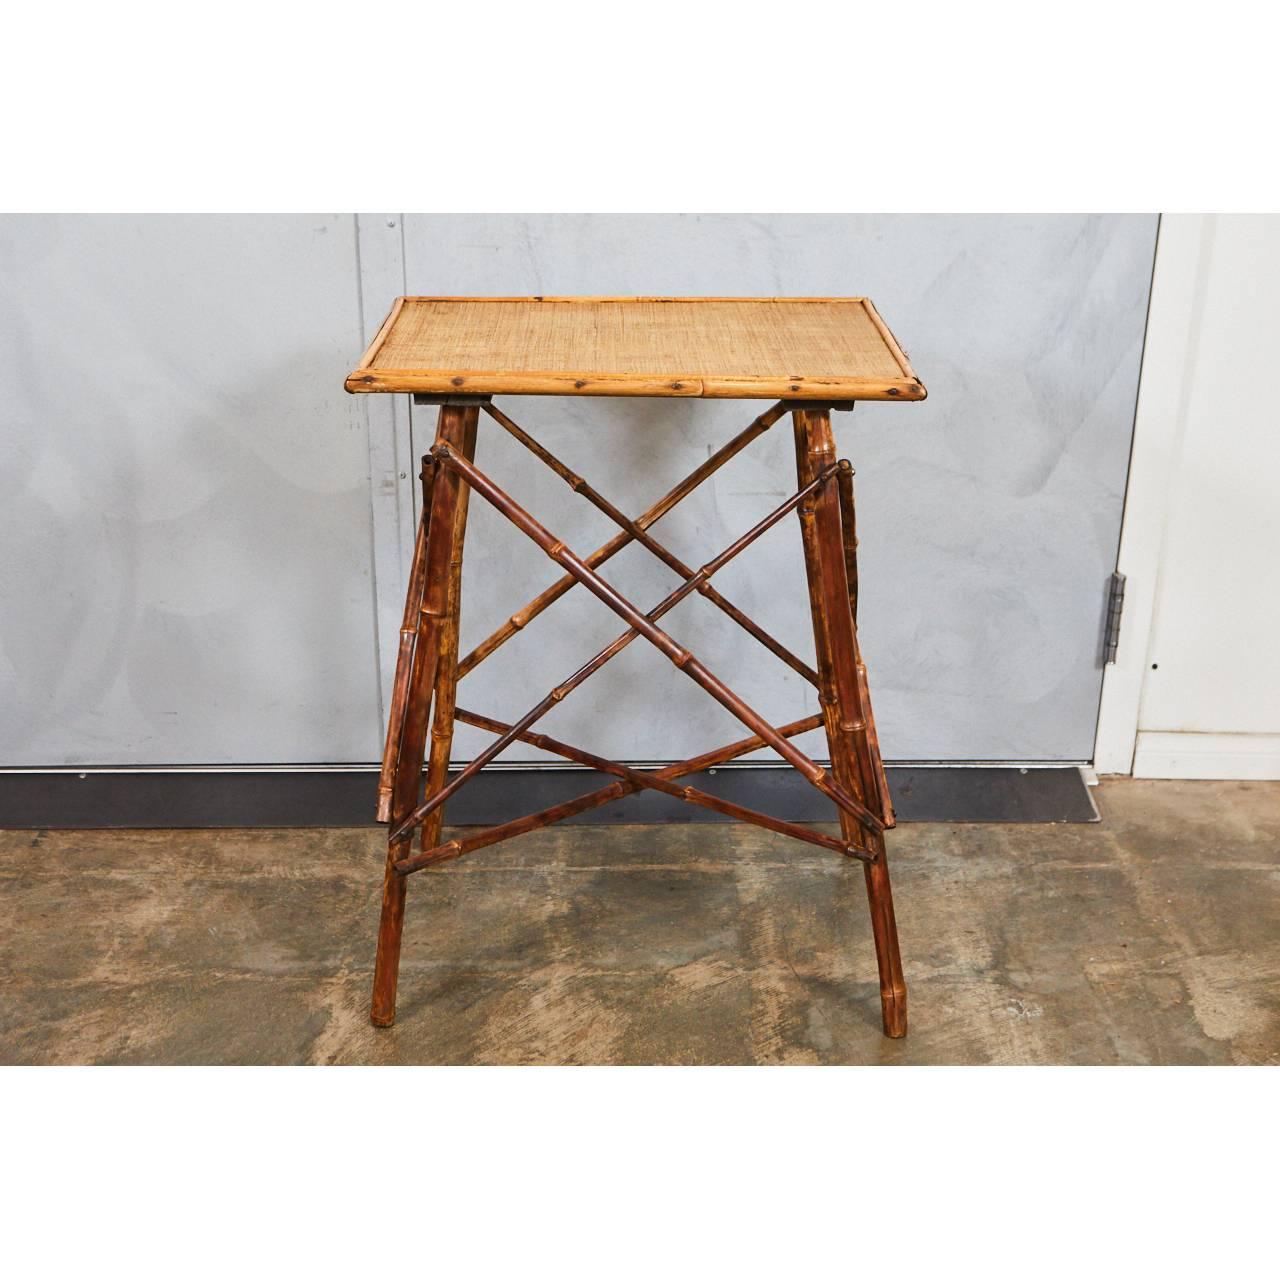 This small side table is a classic Victorian tiger bamboo piece with interesting crossed side supports and stretchers. The bamboo legs and supports have been reinforced with wooden dowels. The top has new waxed cane matting.

    